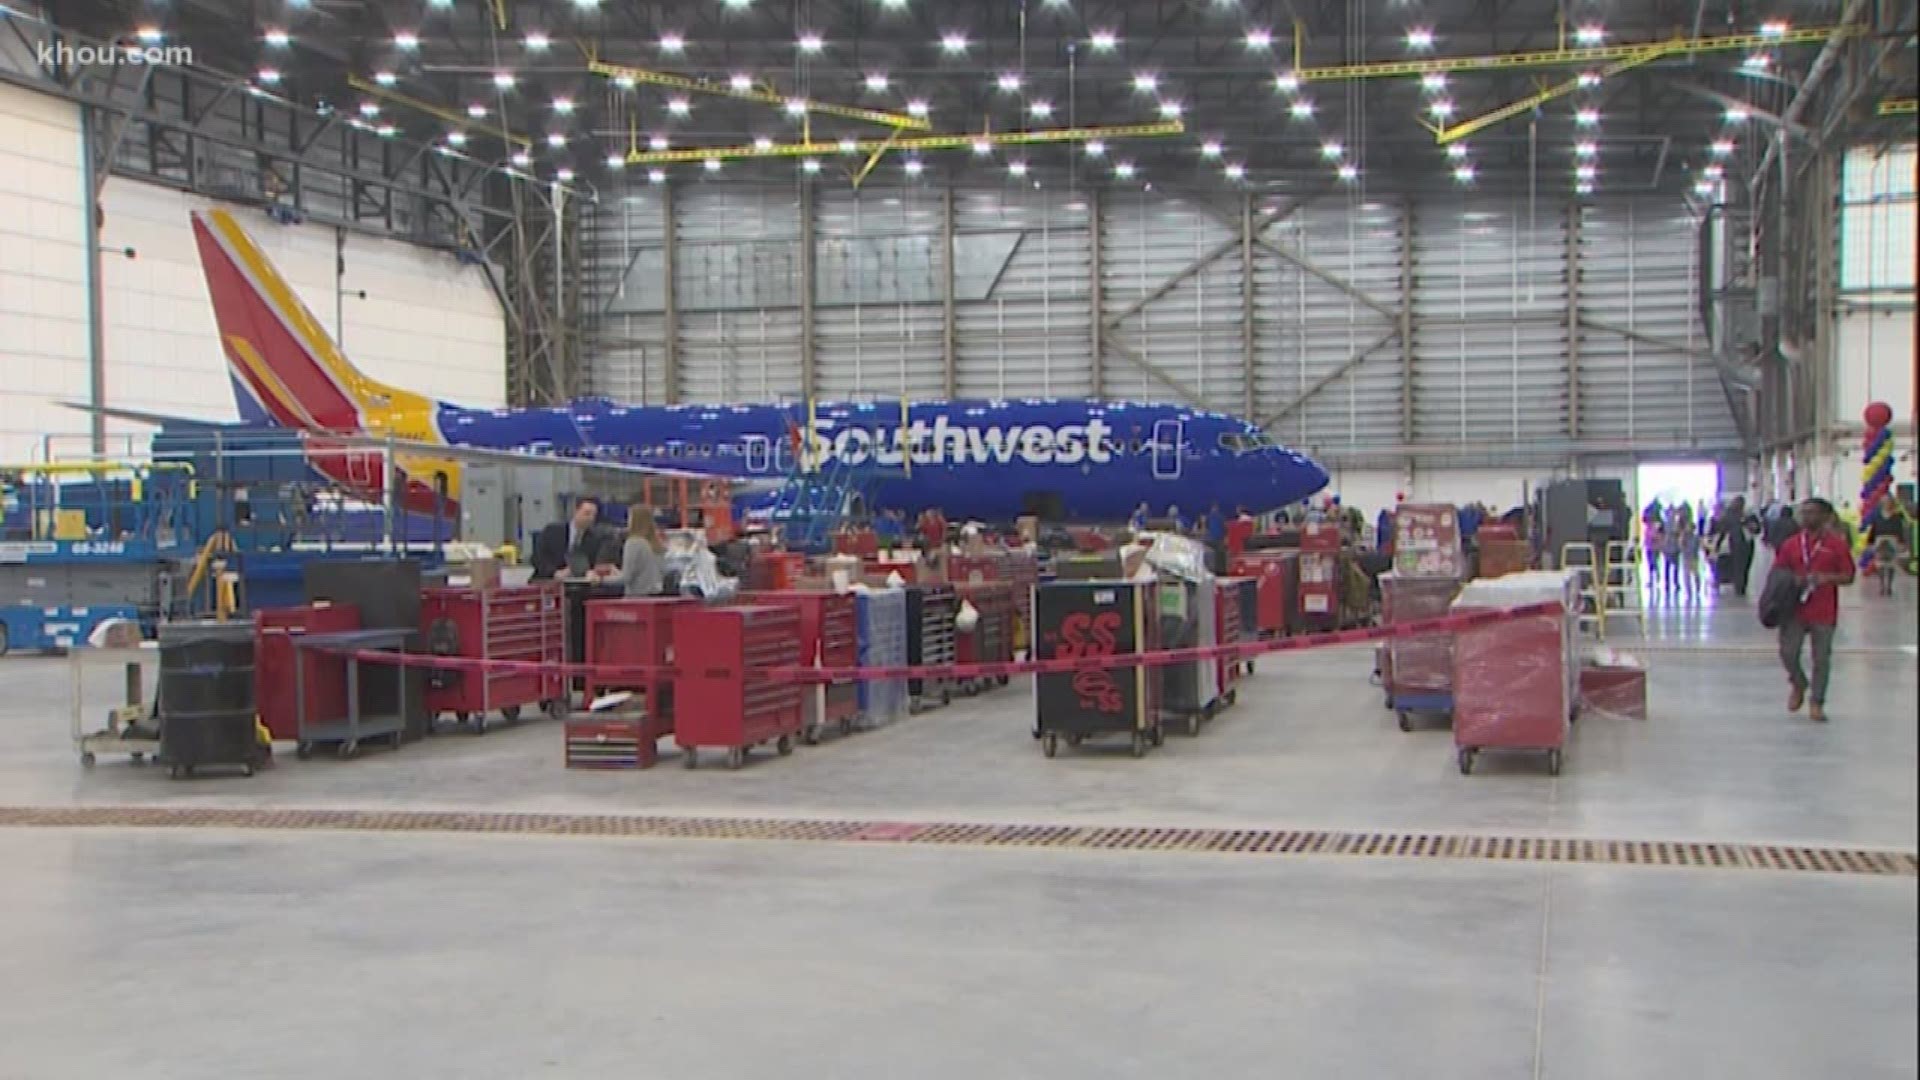 Southwest Airlines will soon fly out of Houston's Bush Airport | king5.com